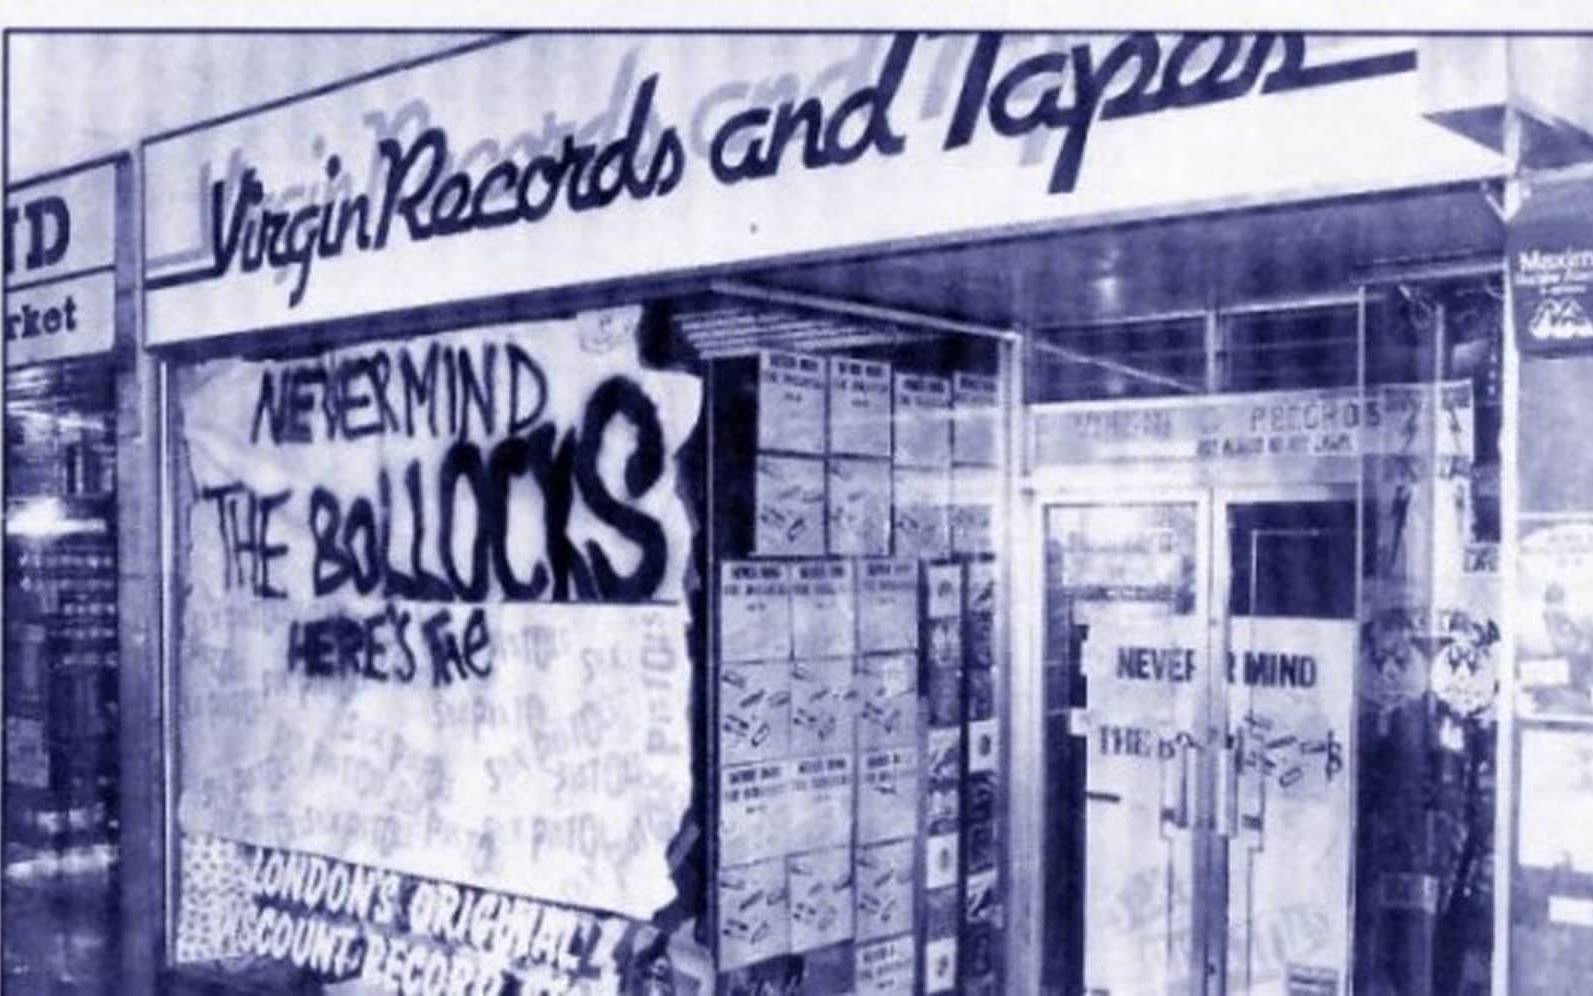 Black and white photo of the storefront of Virgin Records, with graffiti in the window